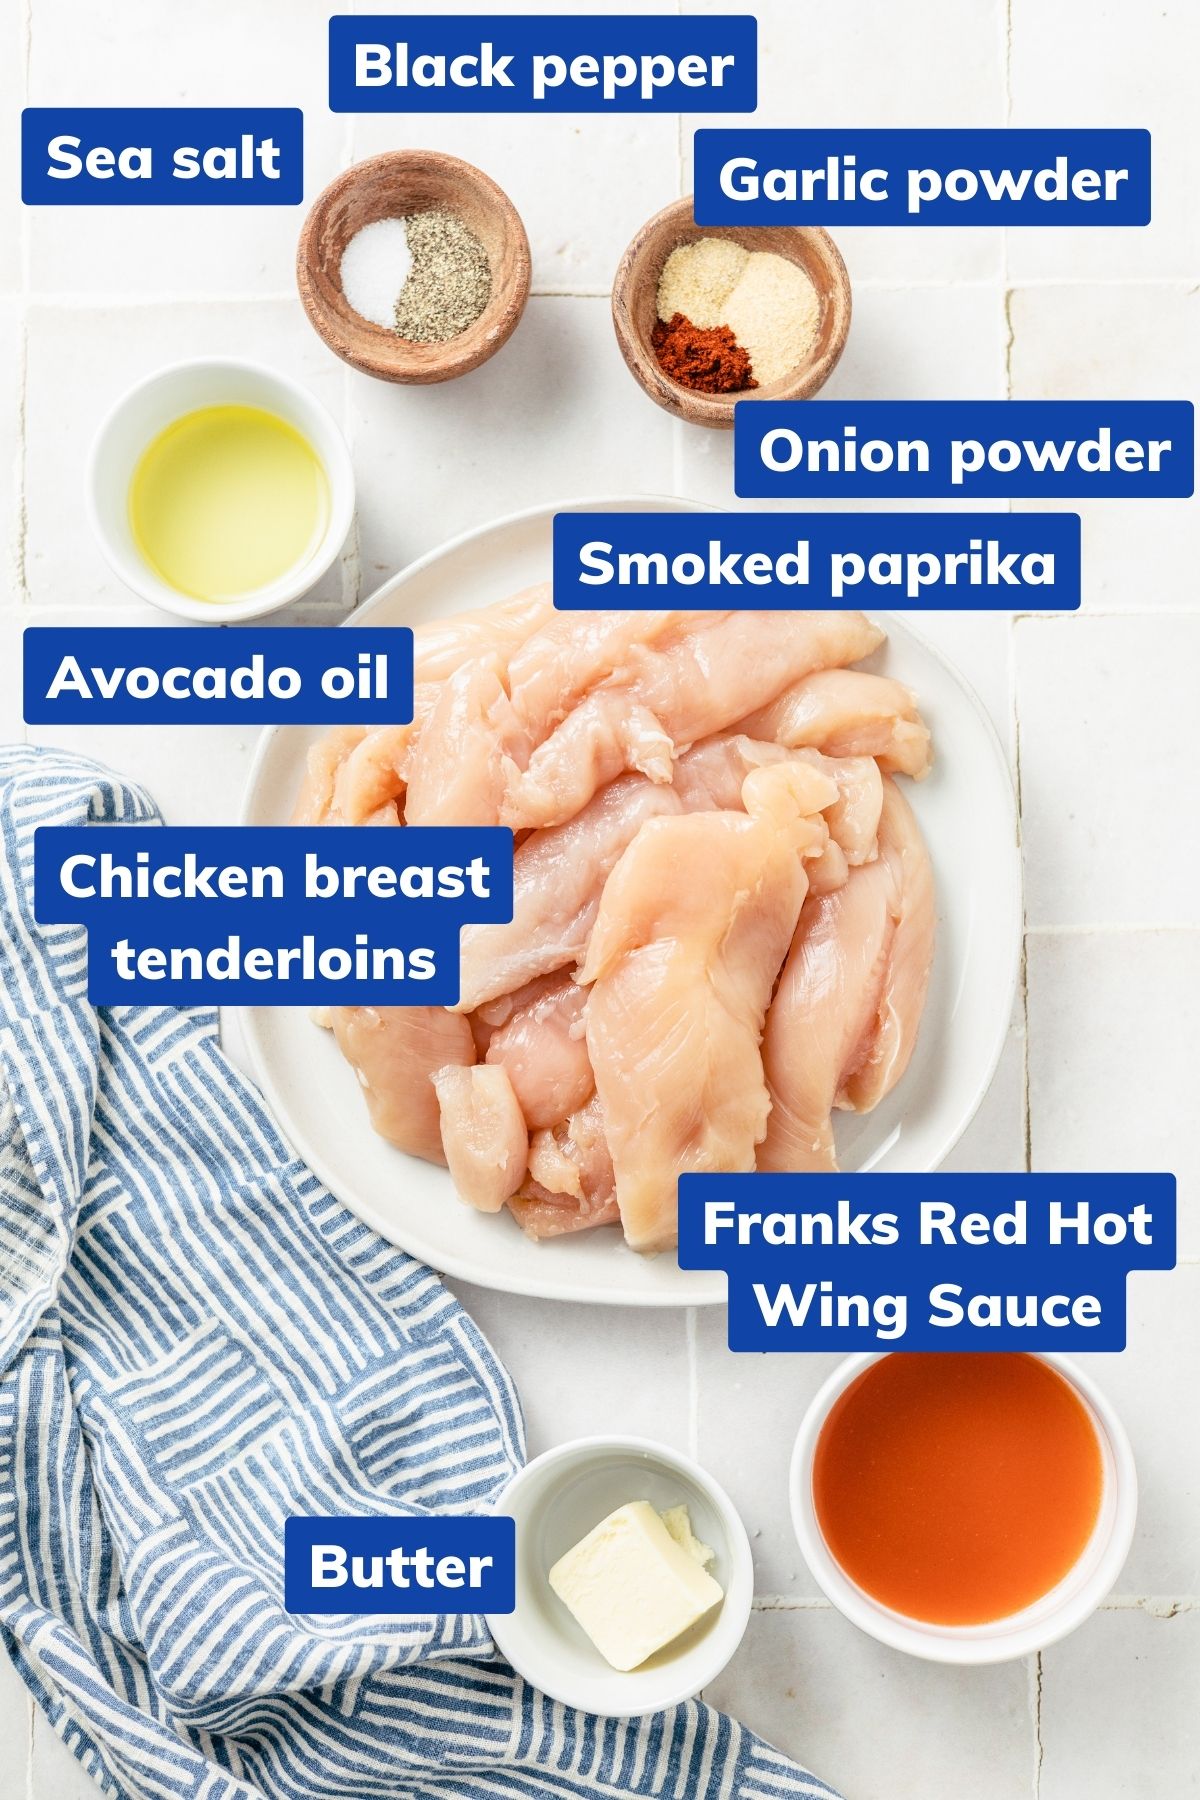 ingredients needed to make buffalo chicken breast tenders: Chicken Breast Tenderloins, Natural Ancient Sea Salt, Black Pepper, Smoked Paprika, Garlic Powder, Onion Powder, Avocado Oil, Franks Red Hot Wing Sauce and Butter on separate bowls